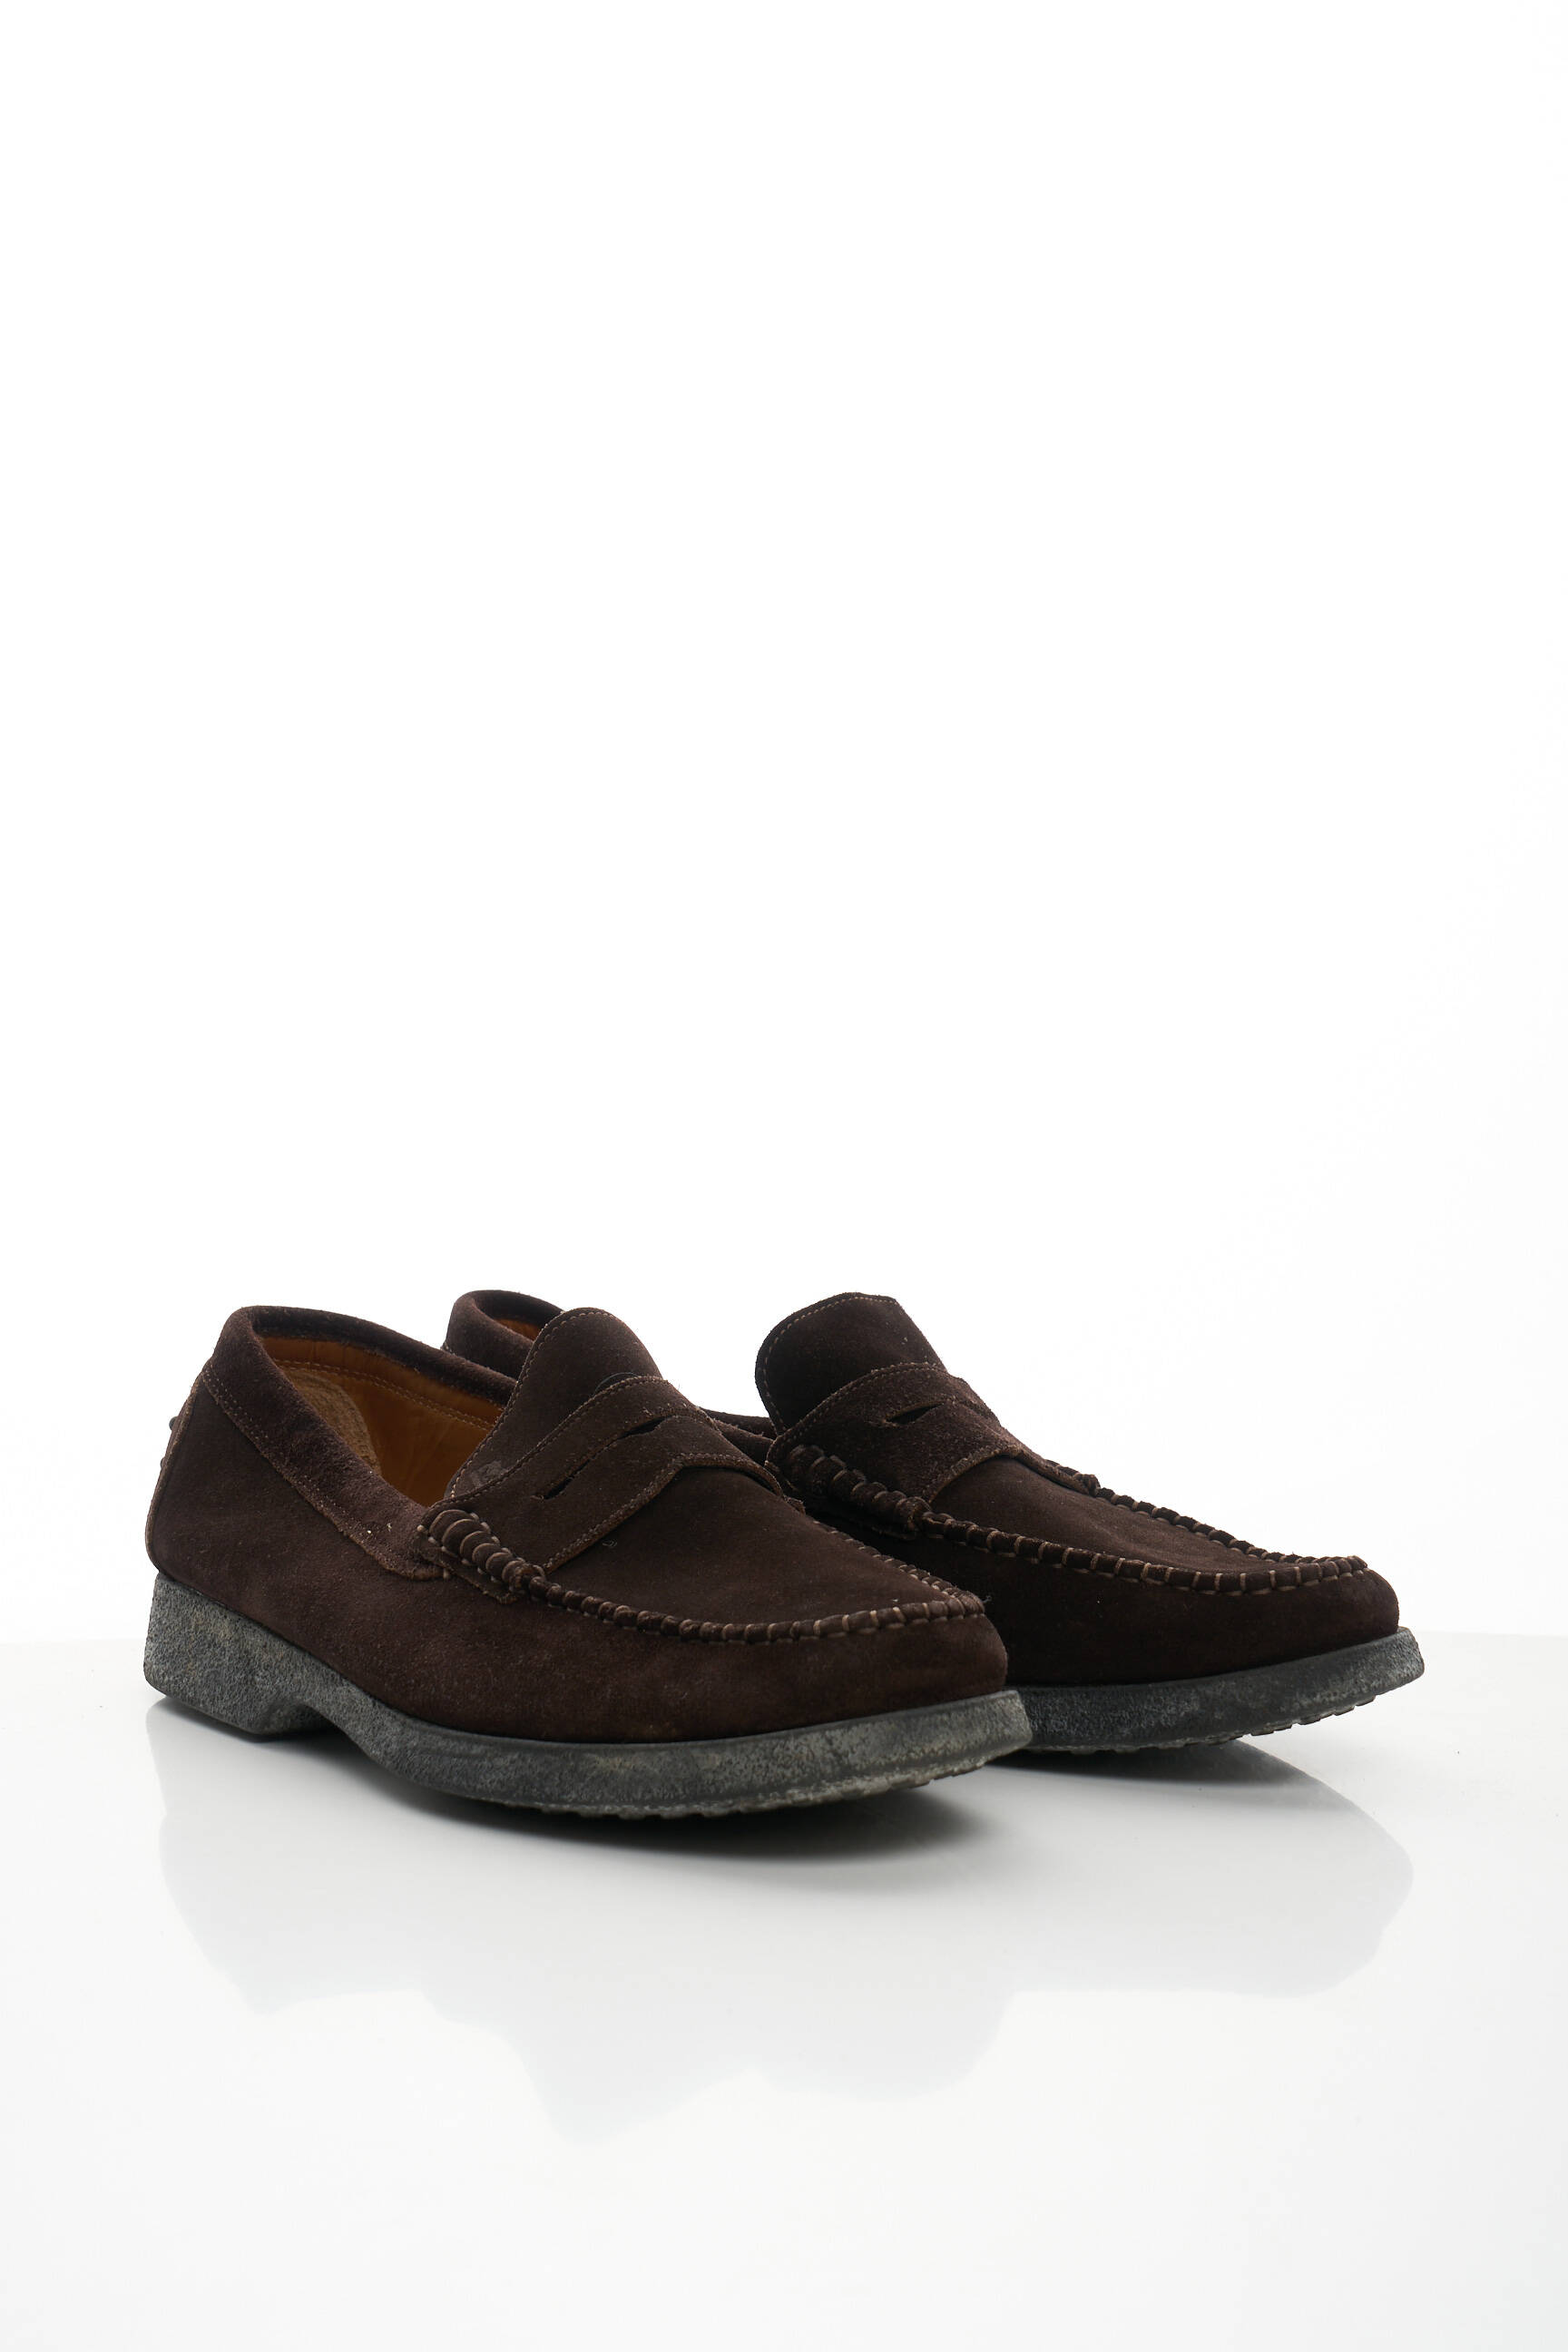 Mocassins TODS 45,5 marron Homme Chaussures Tods Homme Mocassins Tods Homme Mocassins Tods Homme 